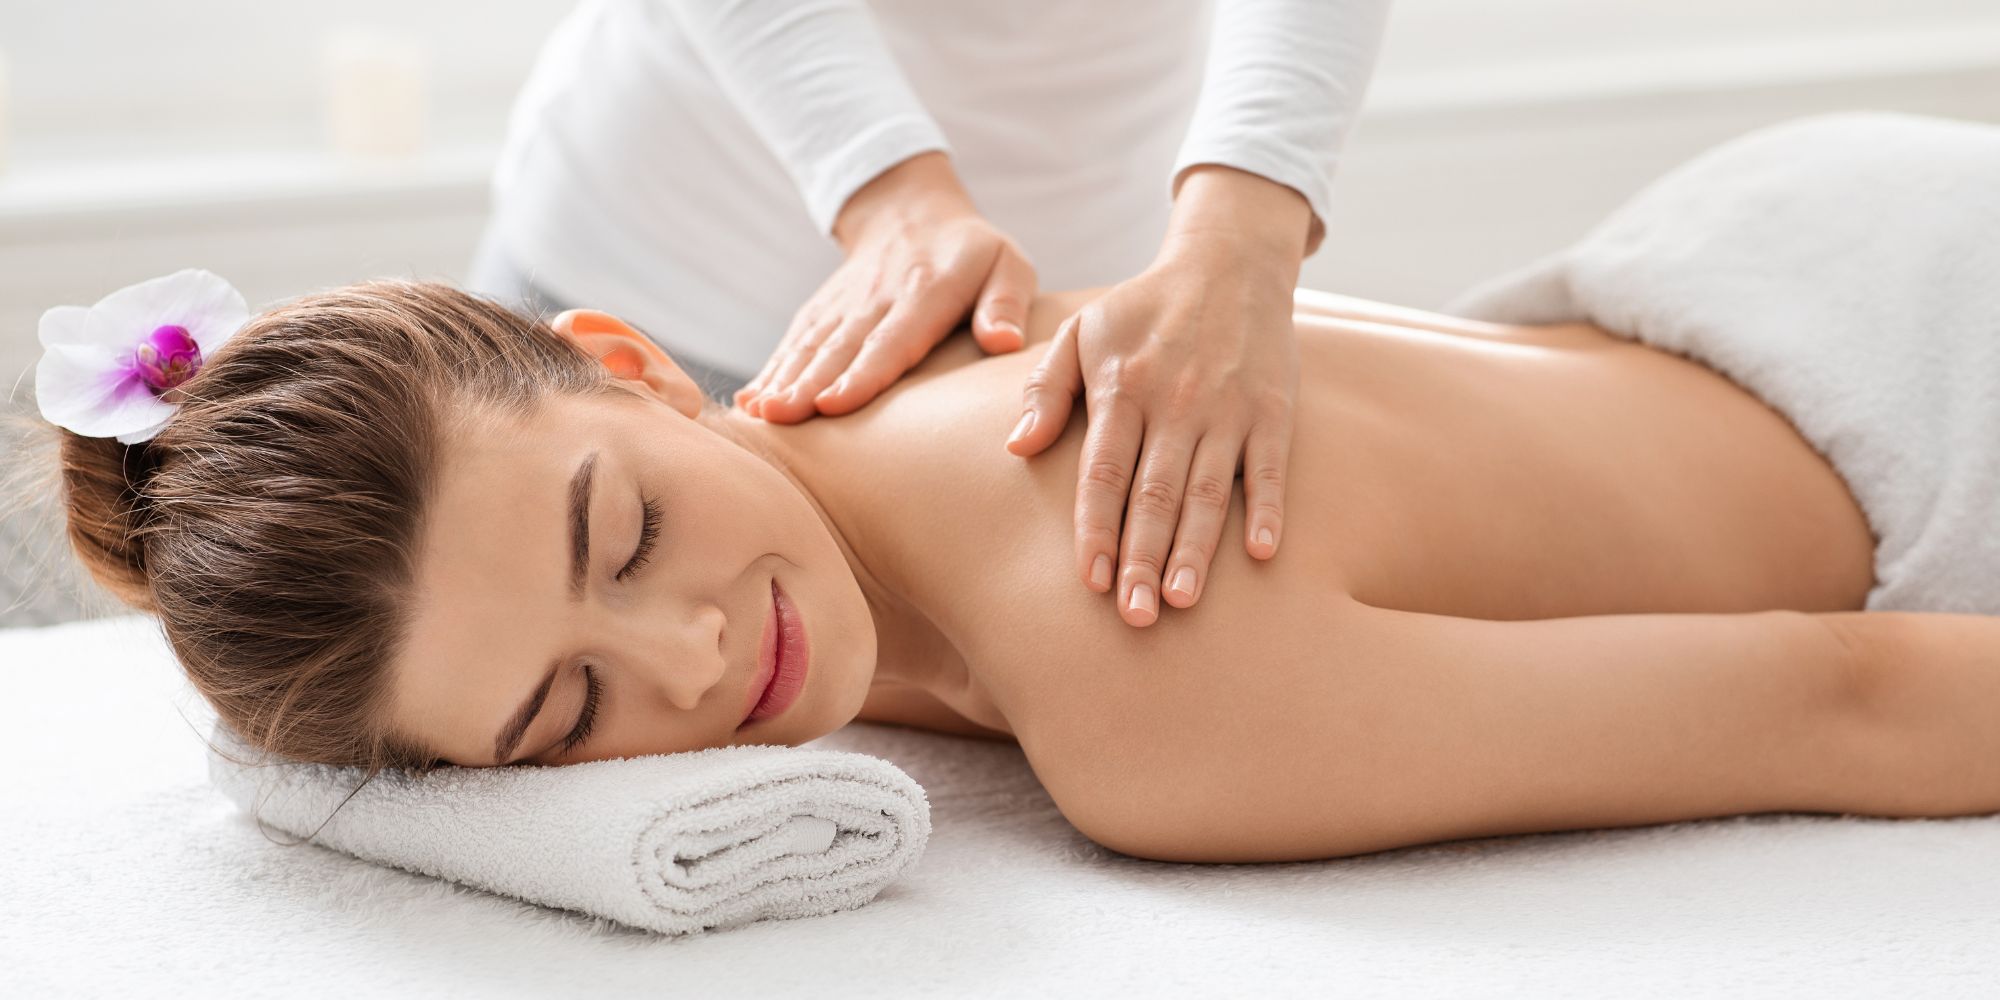 Relaxing back massage and its benefits - Massagepoint